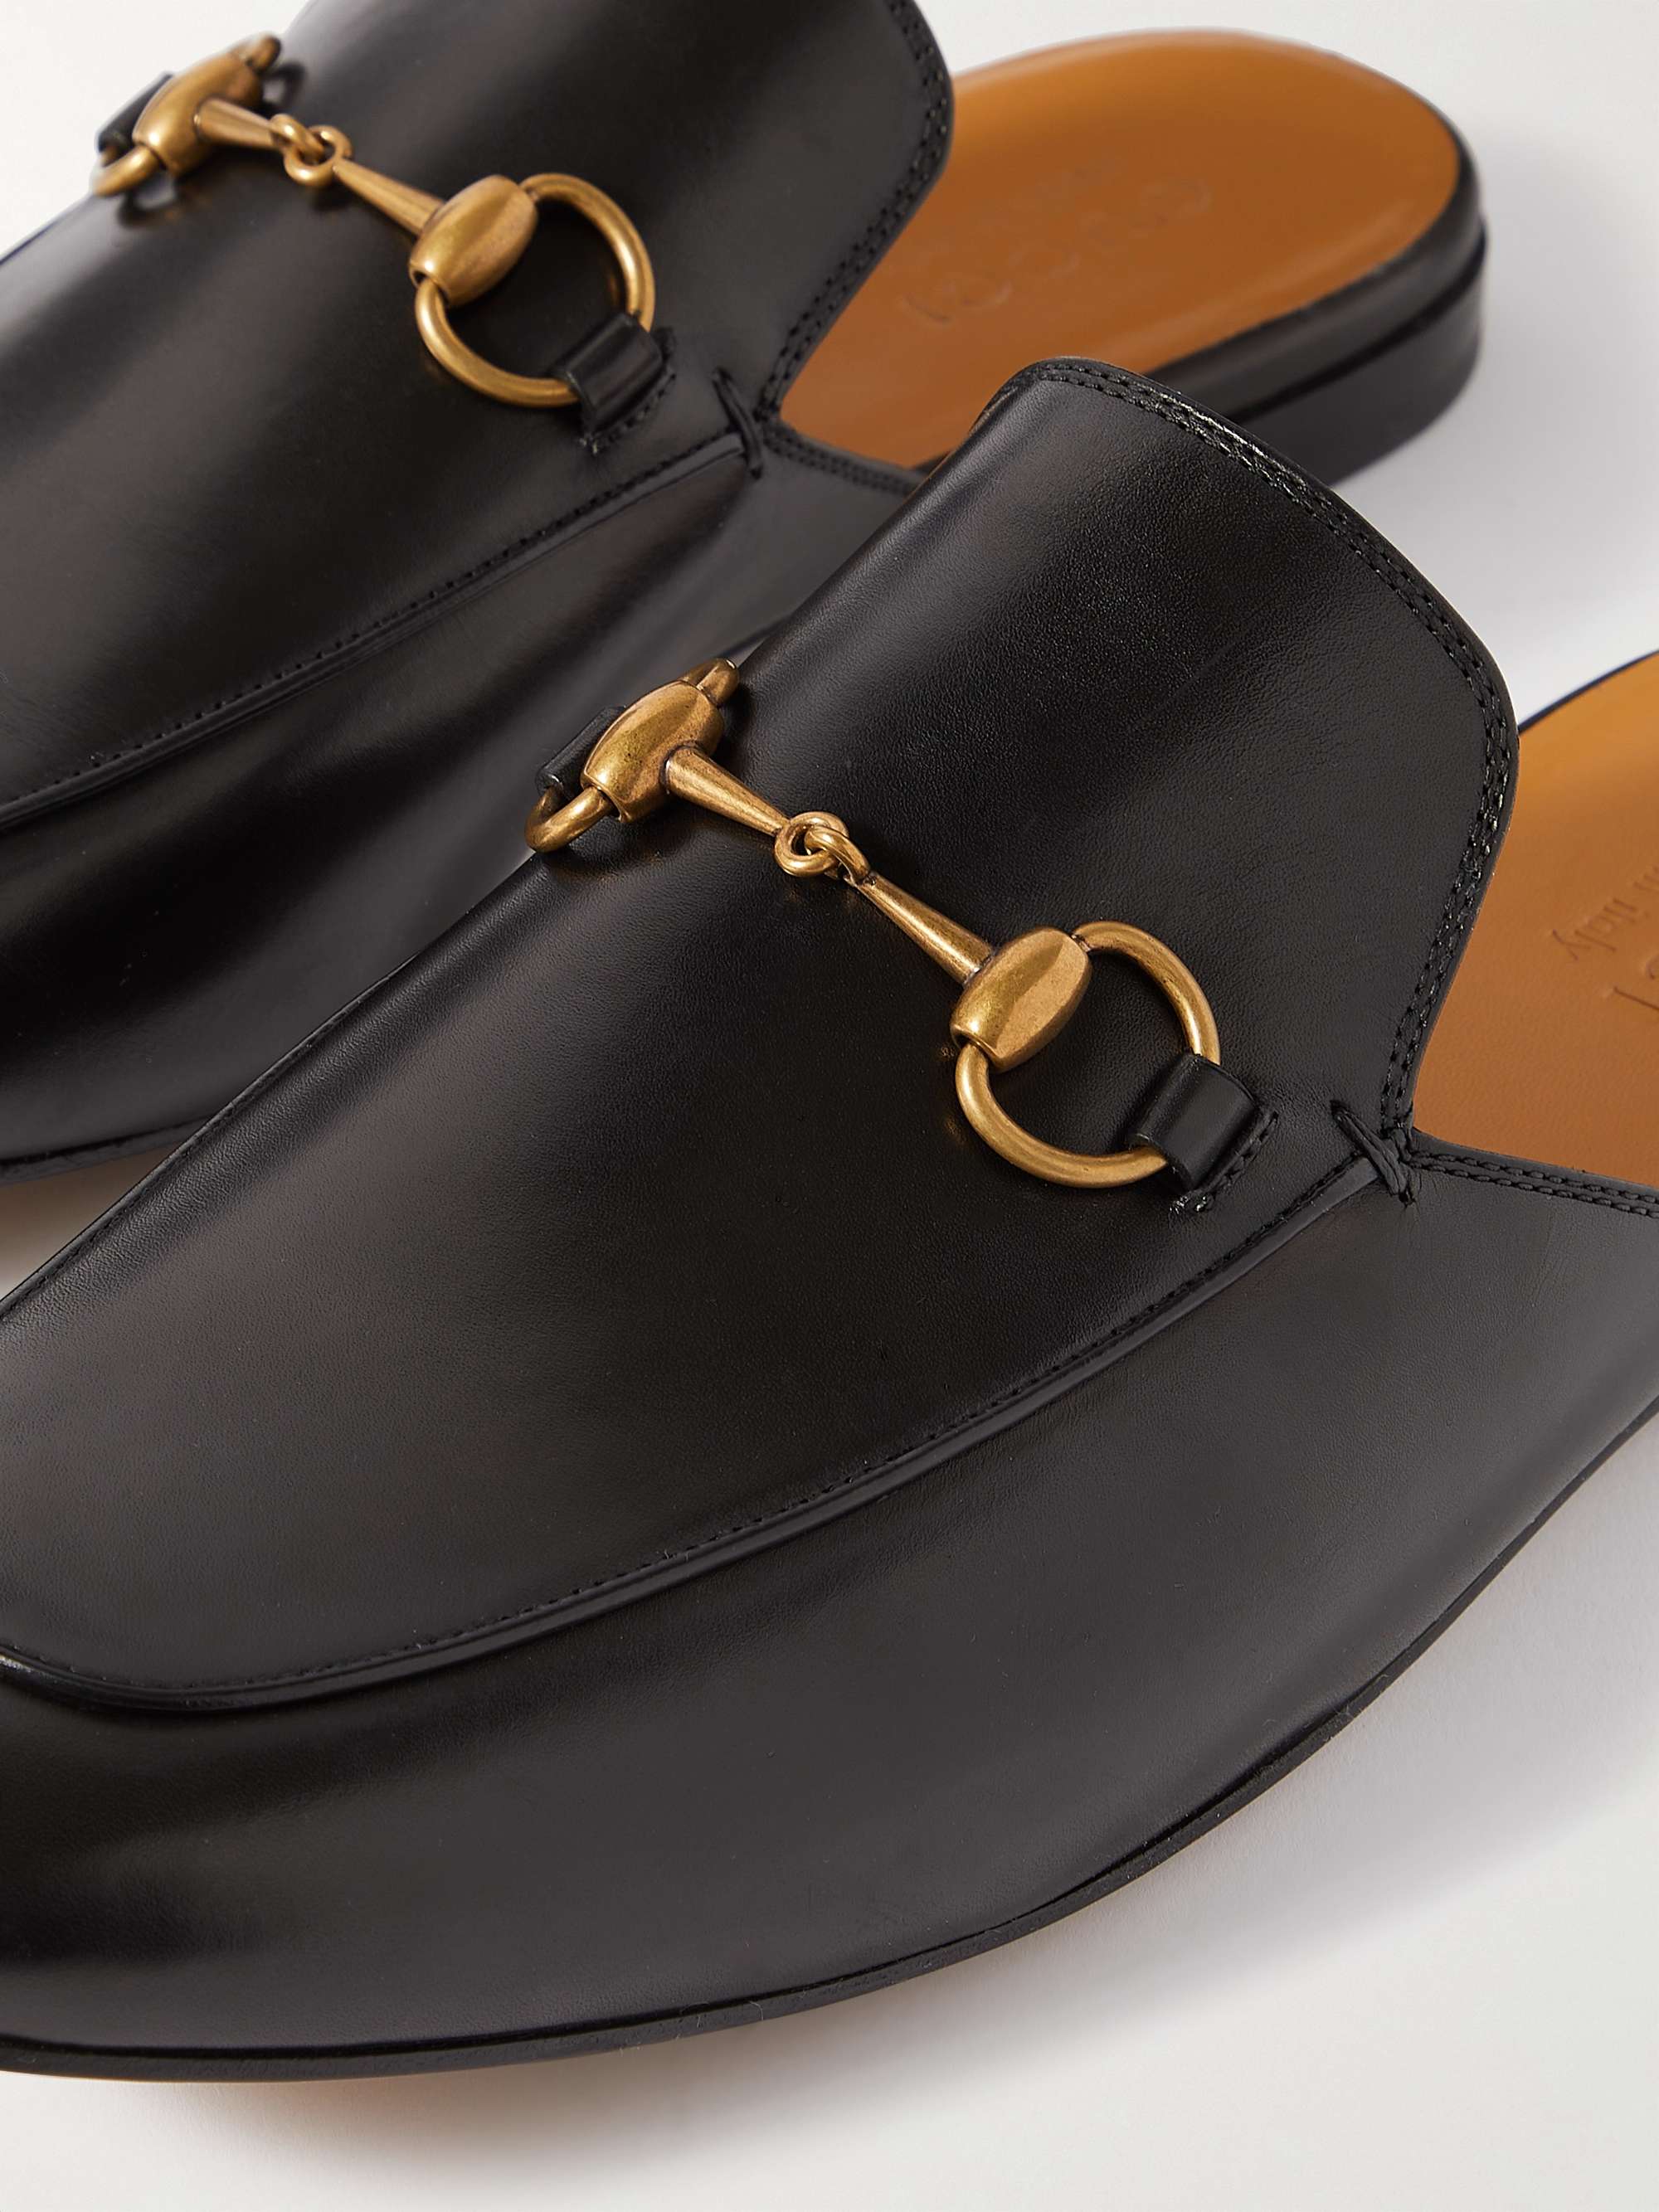 GUCCI Horsebit Leather Backless Loafers